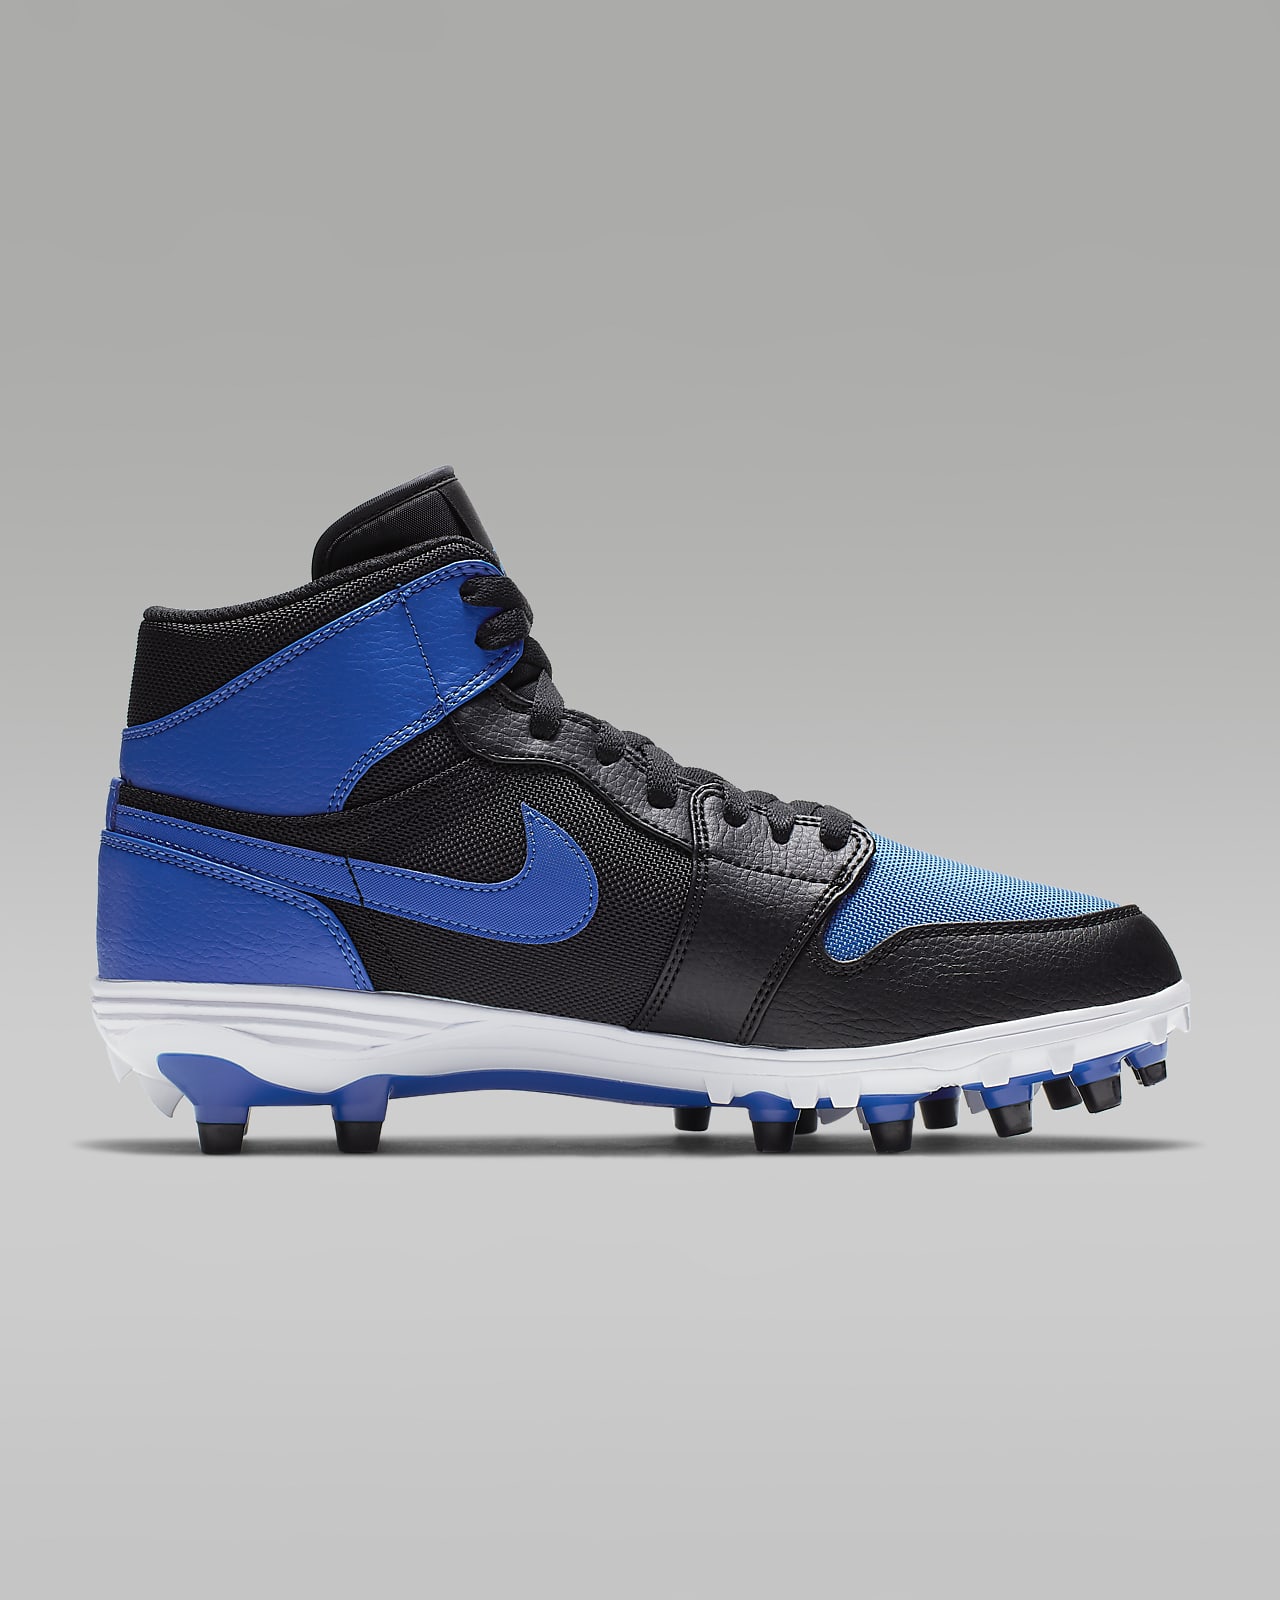 A Look Back at Some of The Best Air Jordan Baseball Cleats